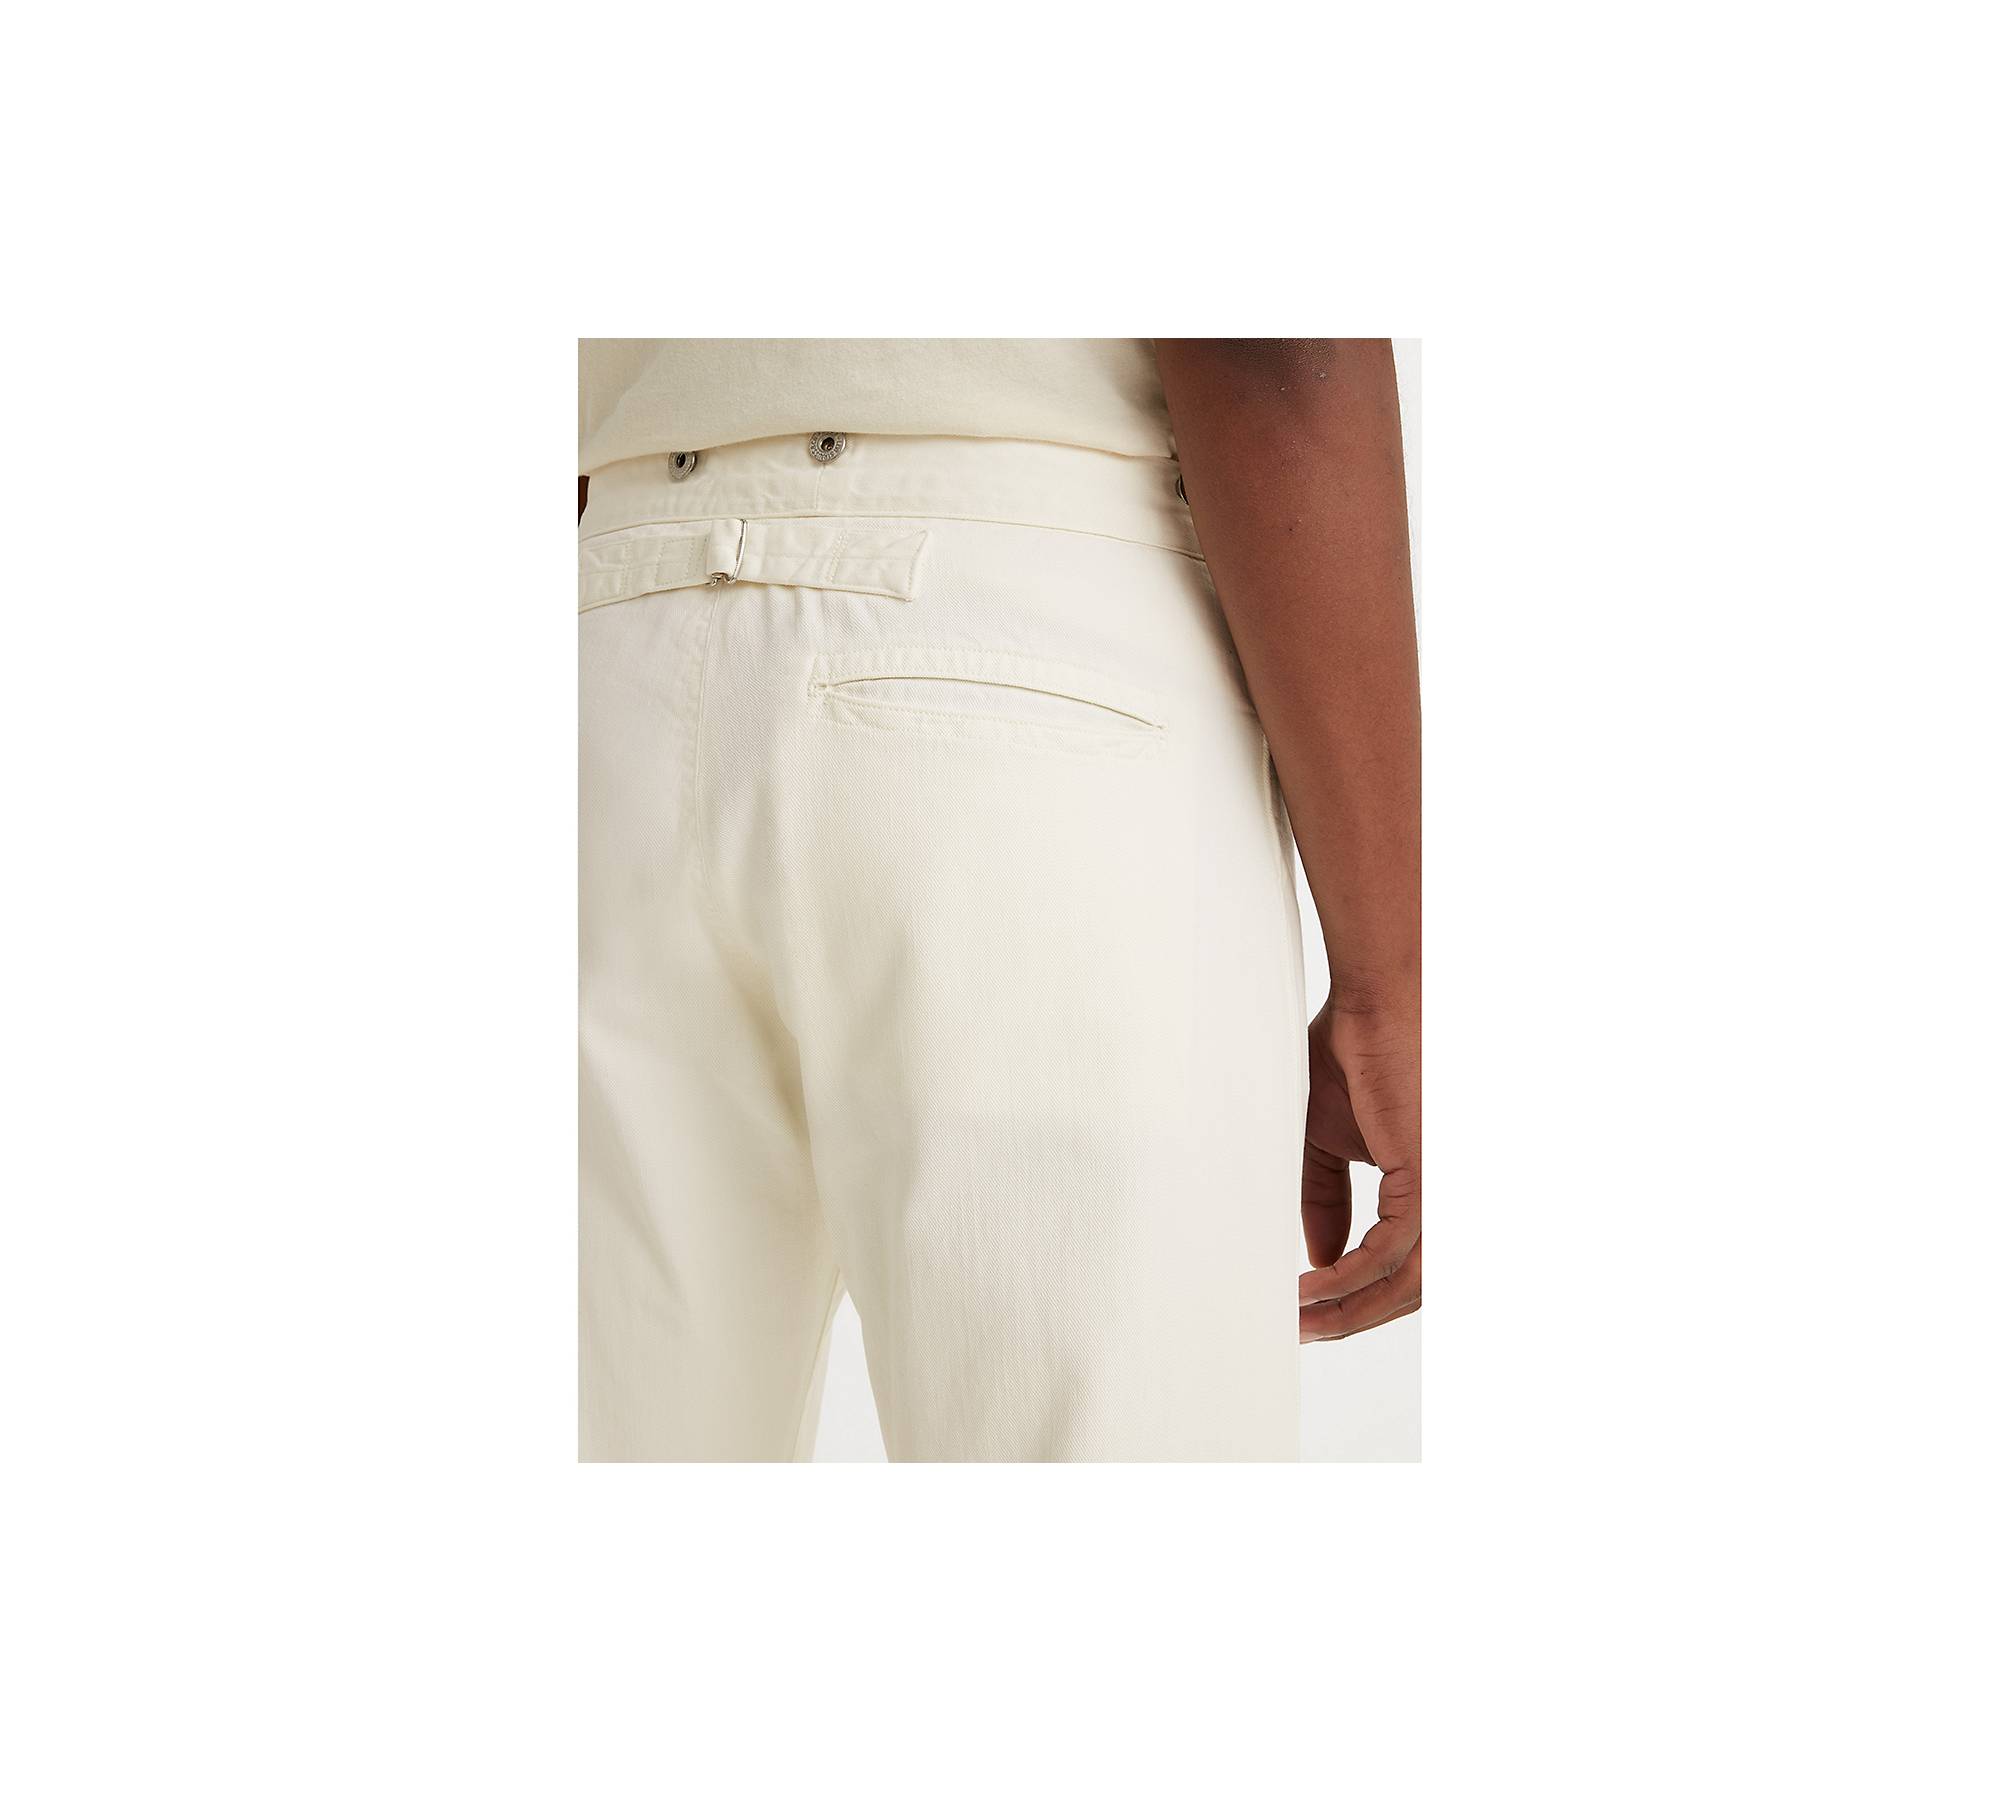 Levi’s® Vintage Clothing 1880s Chino Pants - Neutral | Levi's® AD